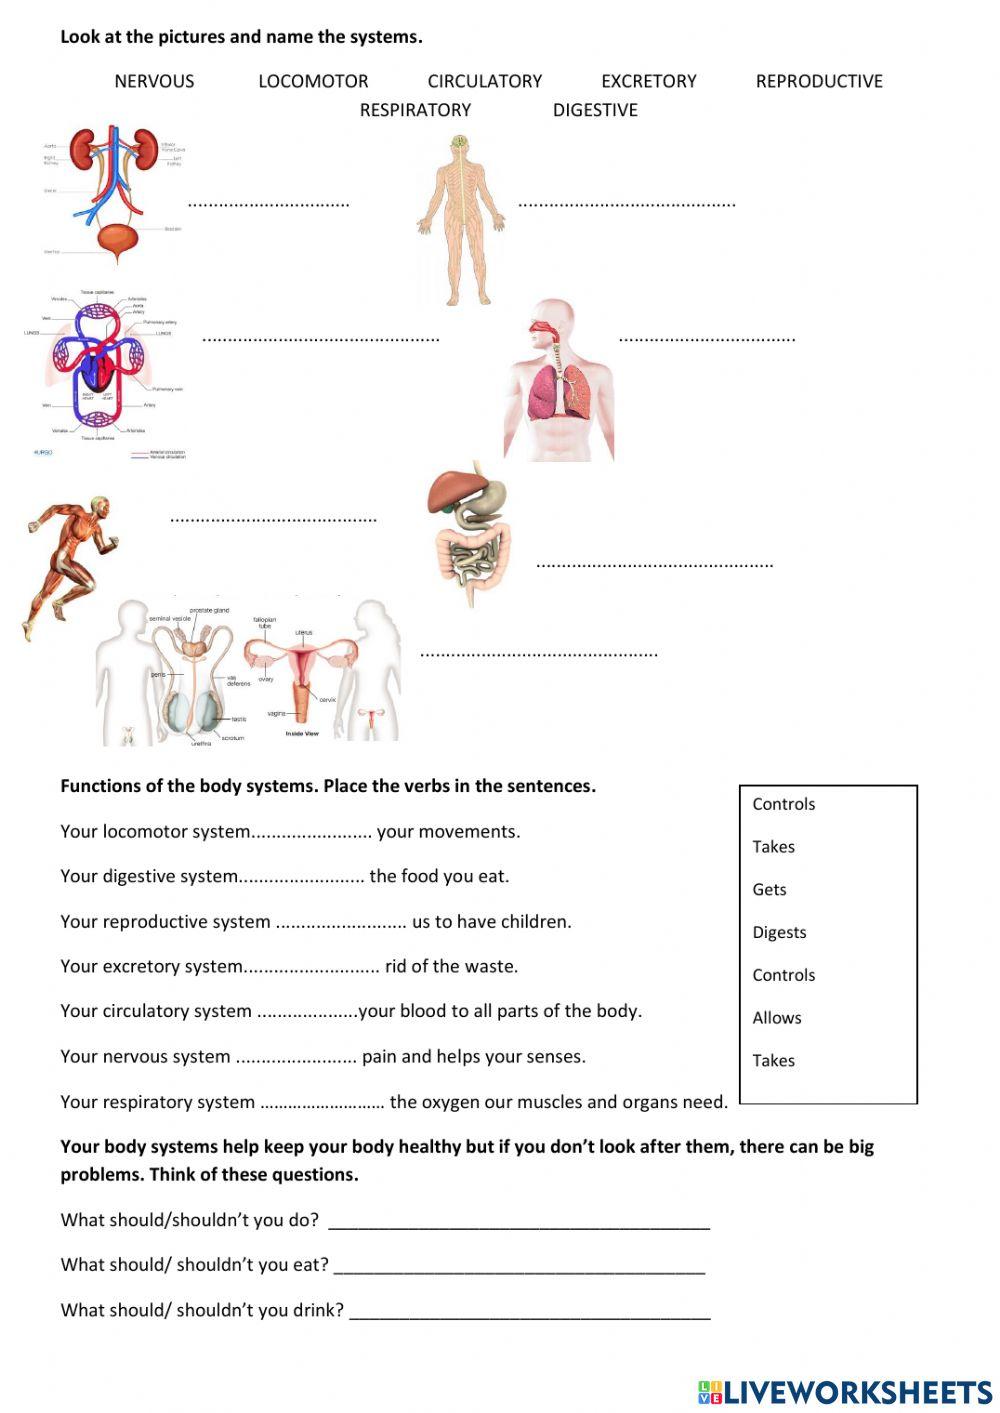 Intro to BODY SYSTEMS